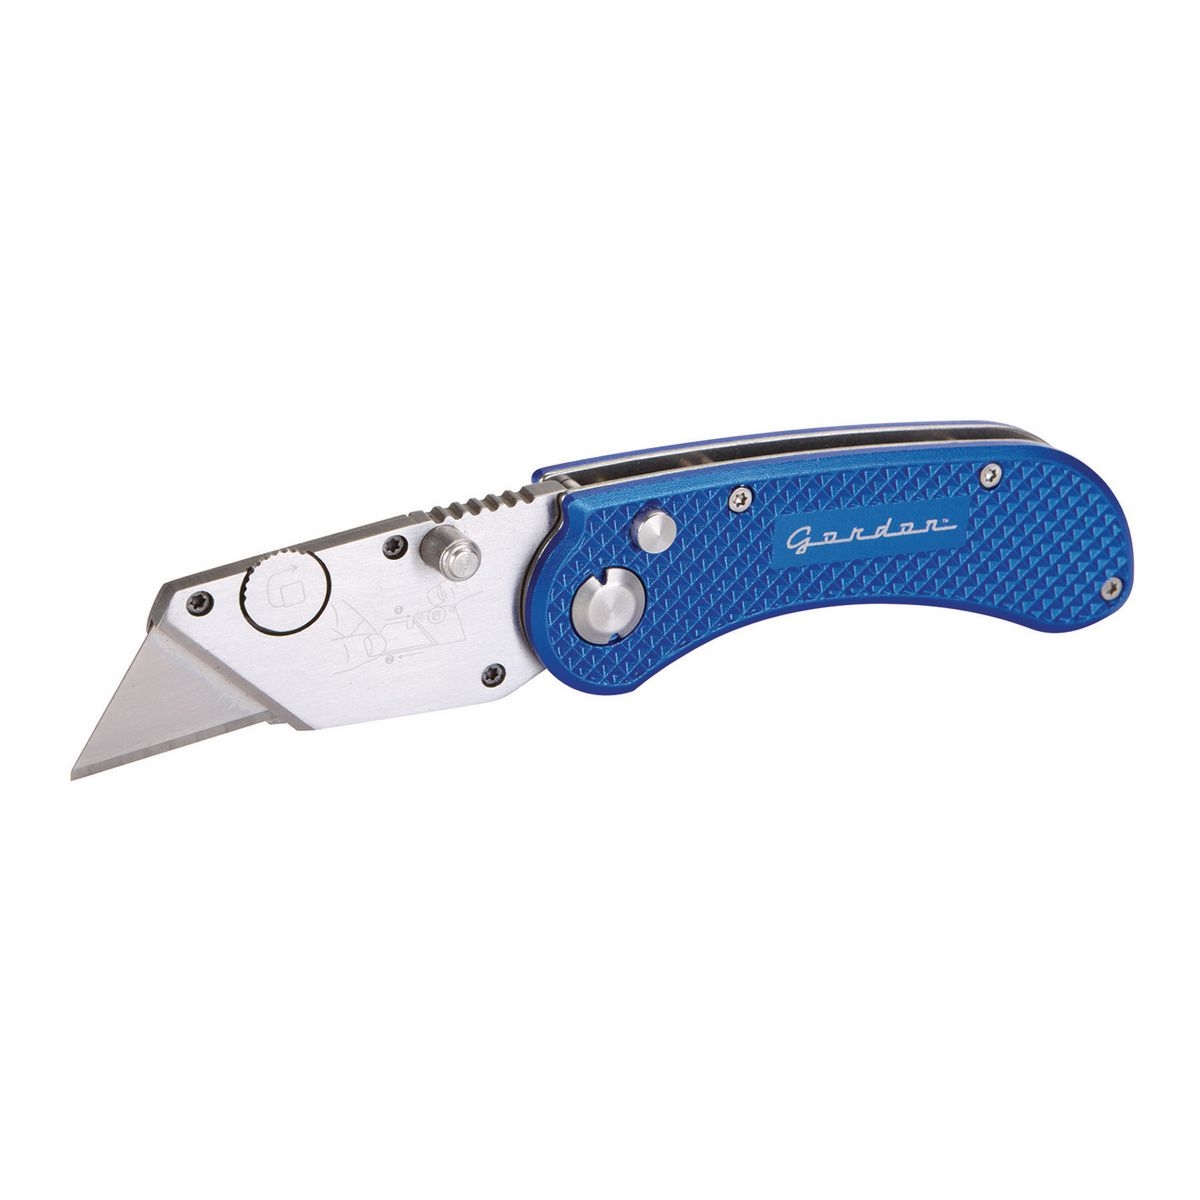 SHIP TO SHORE 6 in. Ceramic Chef's Knife for $9.99 – Harbor Freight Coupons